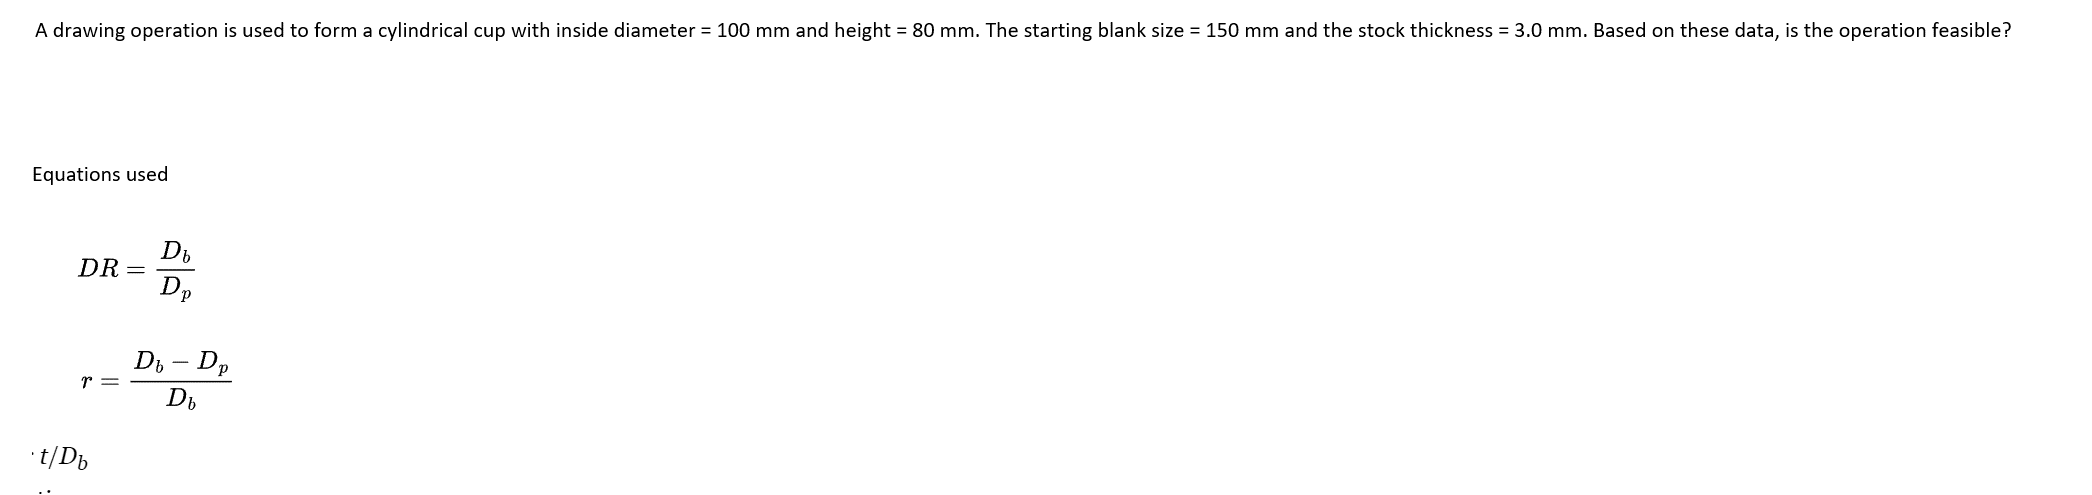 A drawing operation is used to form a cylindrical cup with inside diameter = 100 mm and height = 80 mm. The starting blank size = 150 mm and the stock thickness = 3.0 mm. Based on these data, is the operation feasible?
Equations used
DR =
r =
t/Db
Db
Dp
Db - Dp
Db